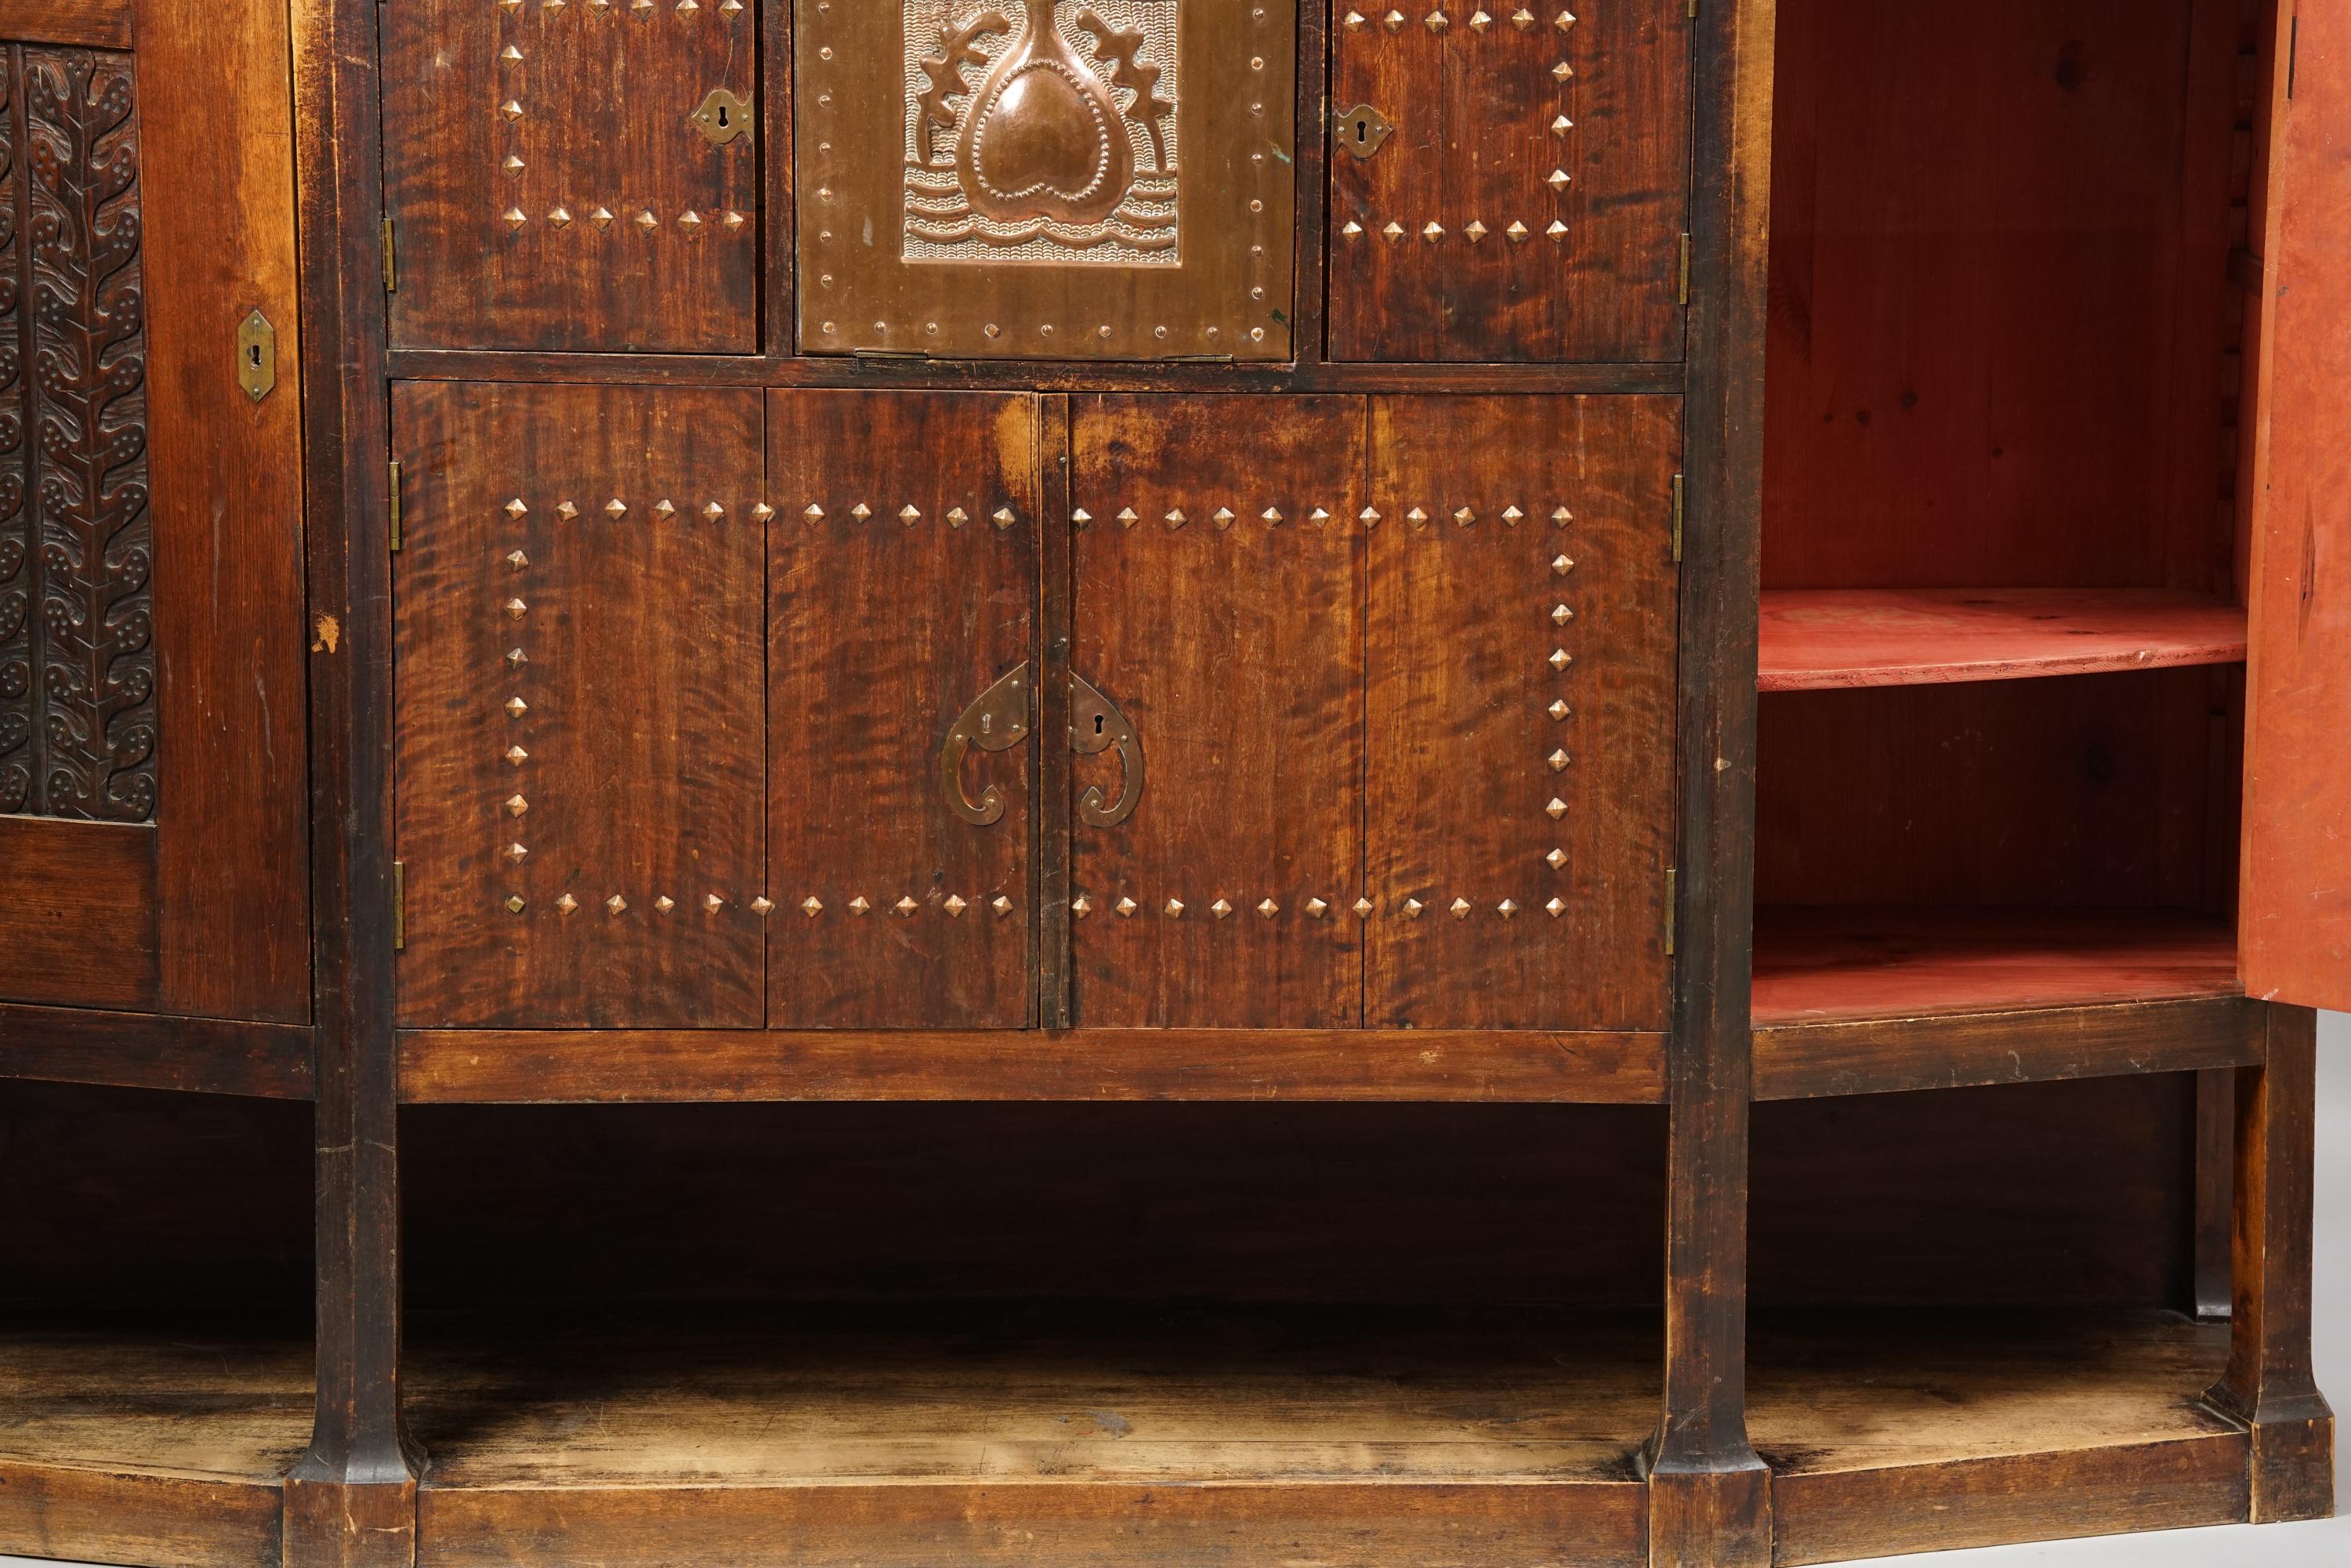 Copper Exceedingly Rare Jugend Cabinet by Eliel Saarinen, Early 1900s For Sale